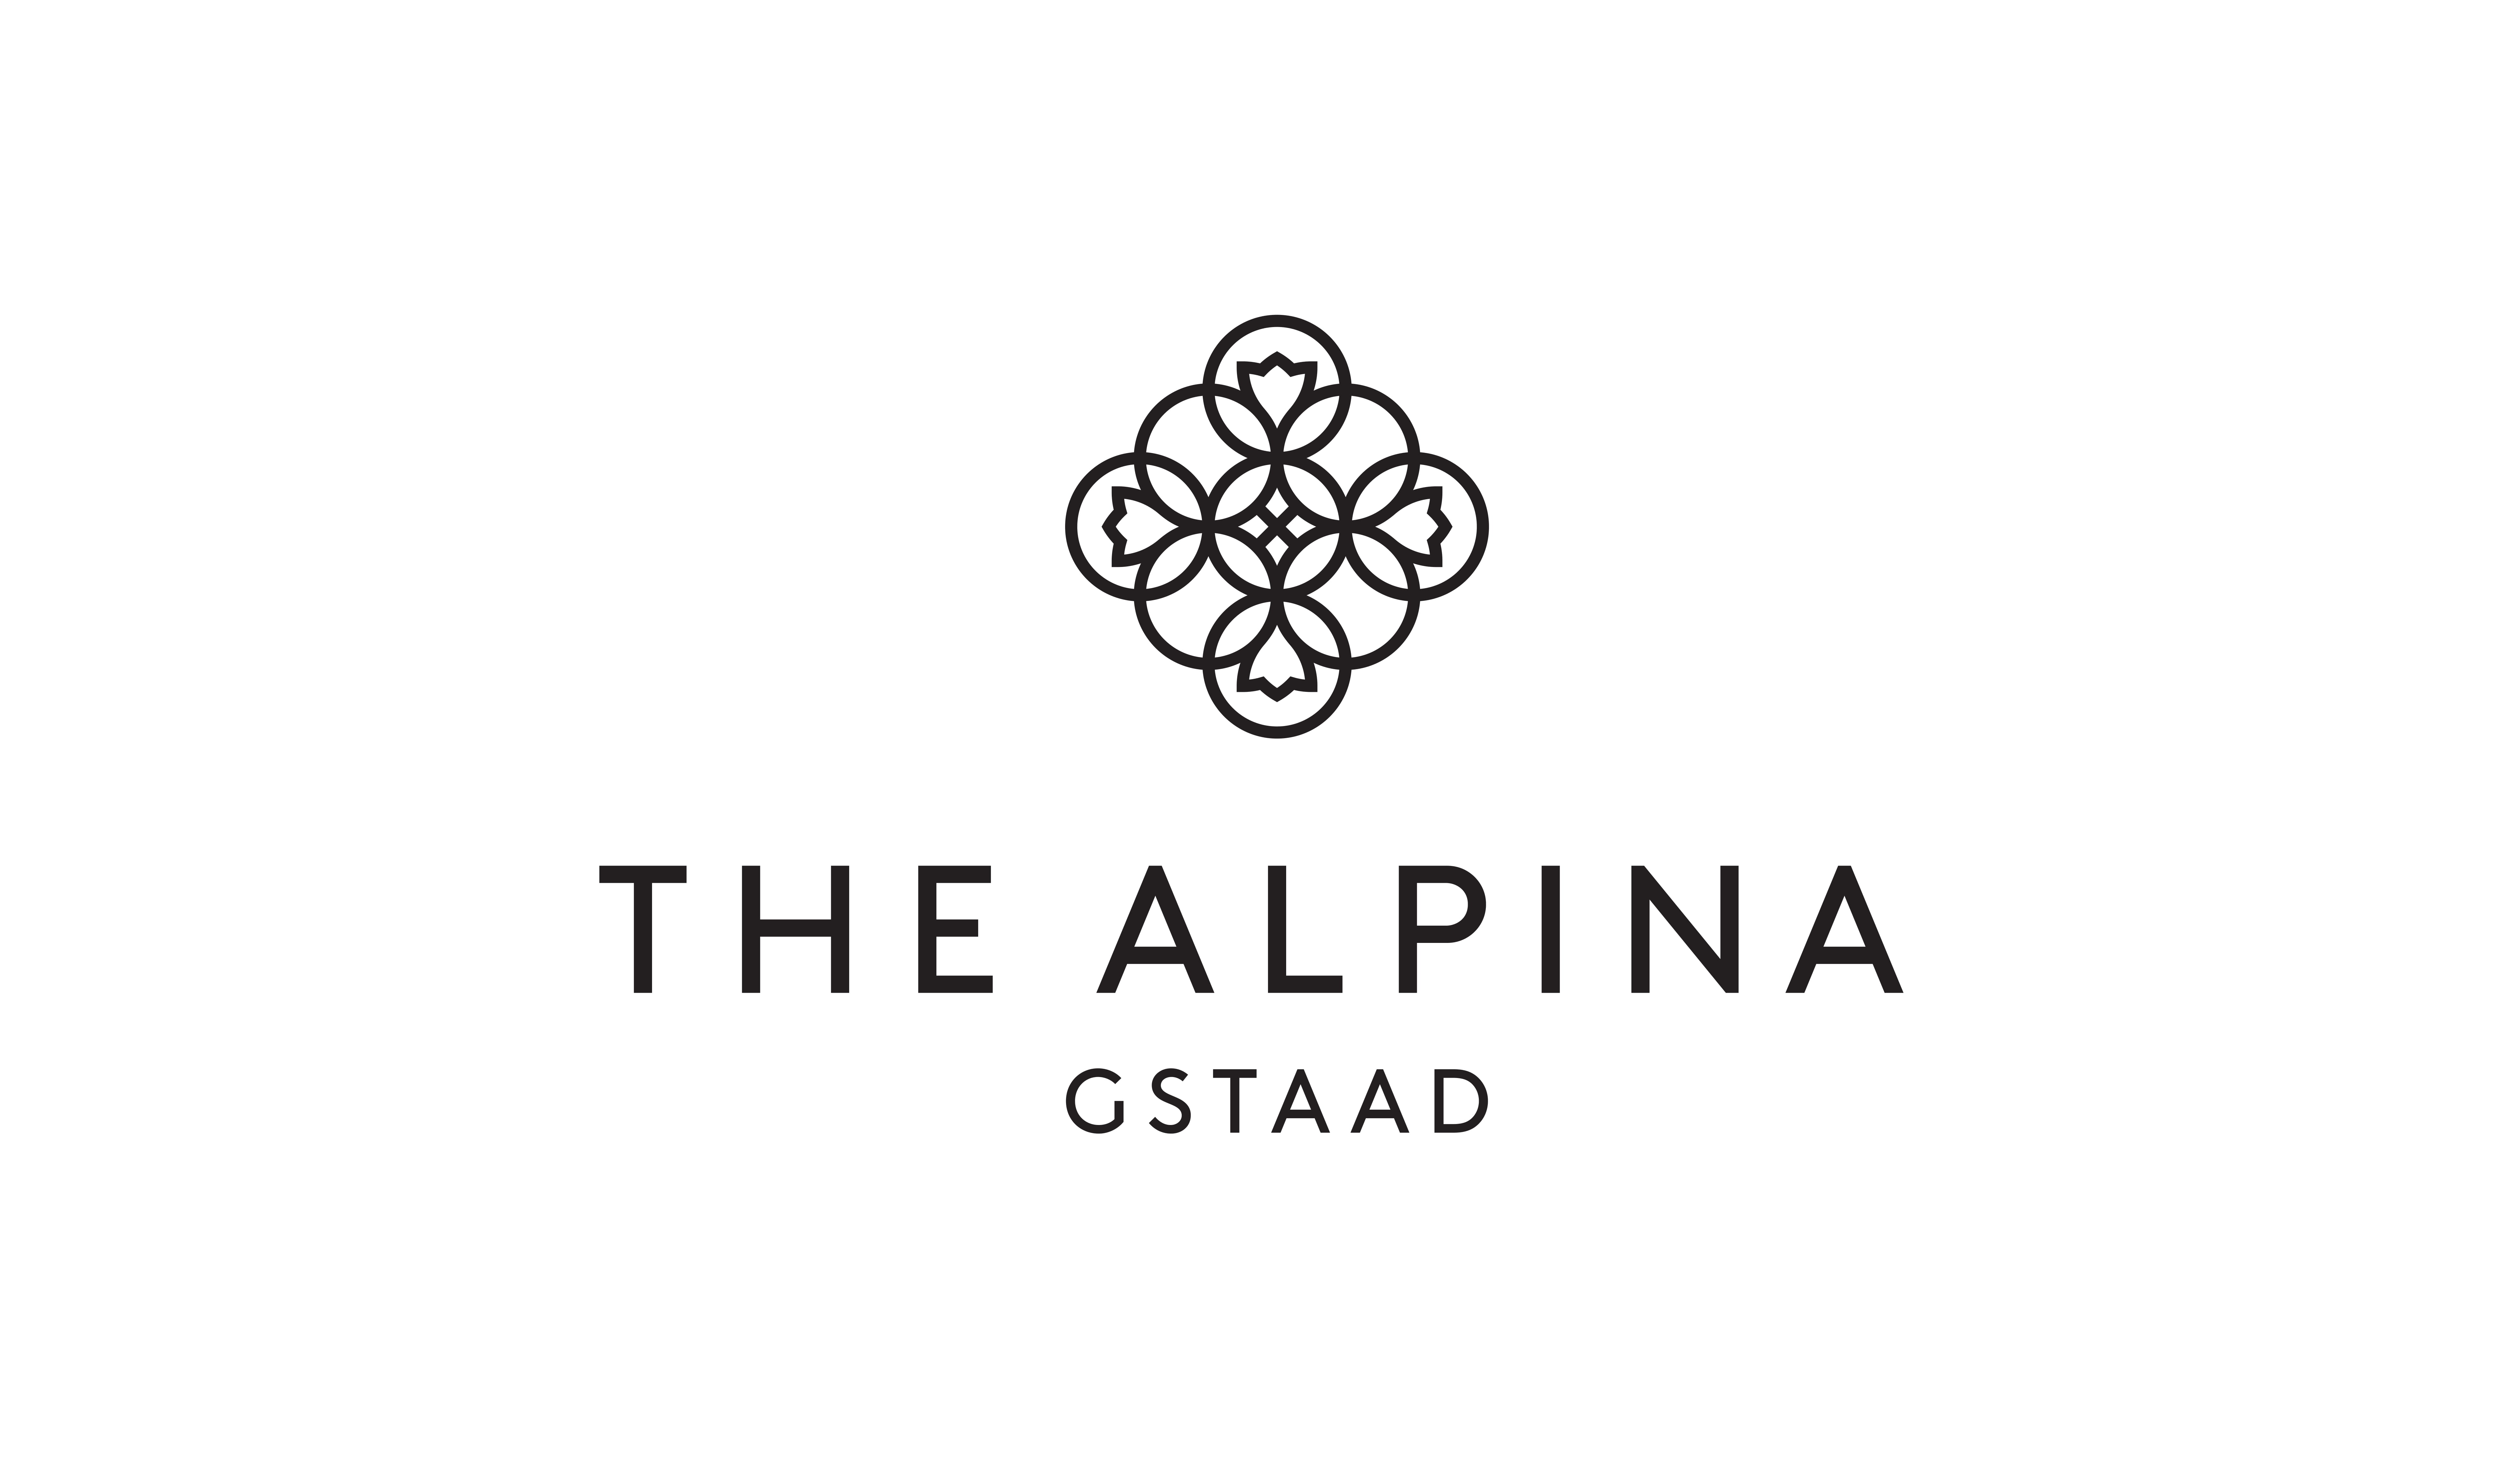 Closing dinner sponsored by Connections in partnership with The Alpina Gstaad